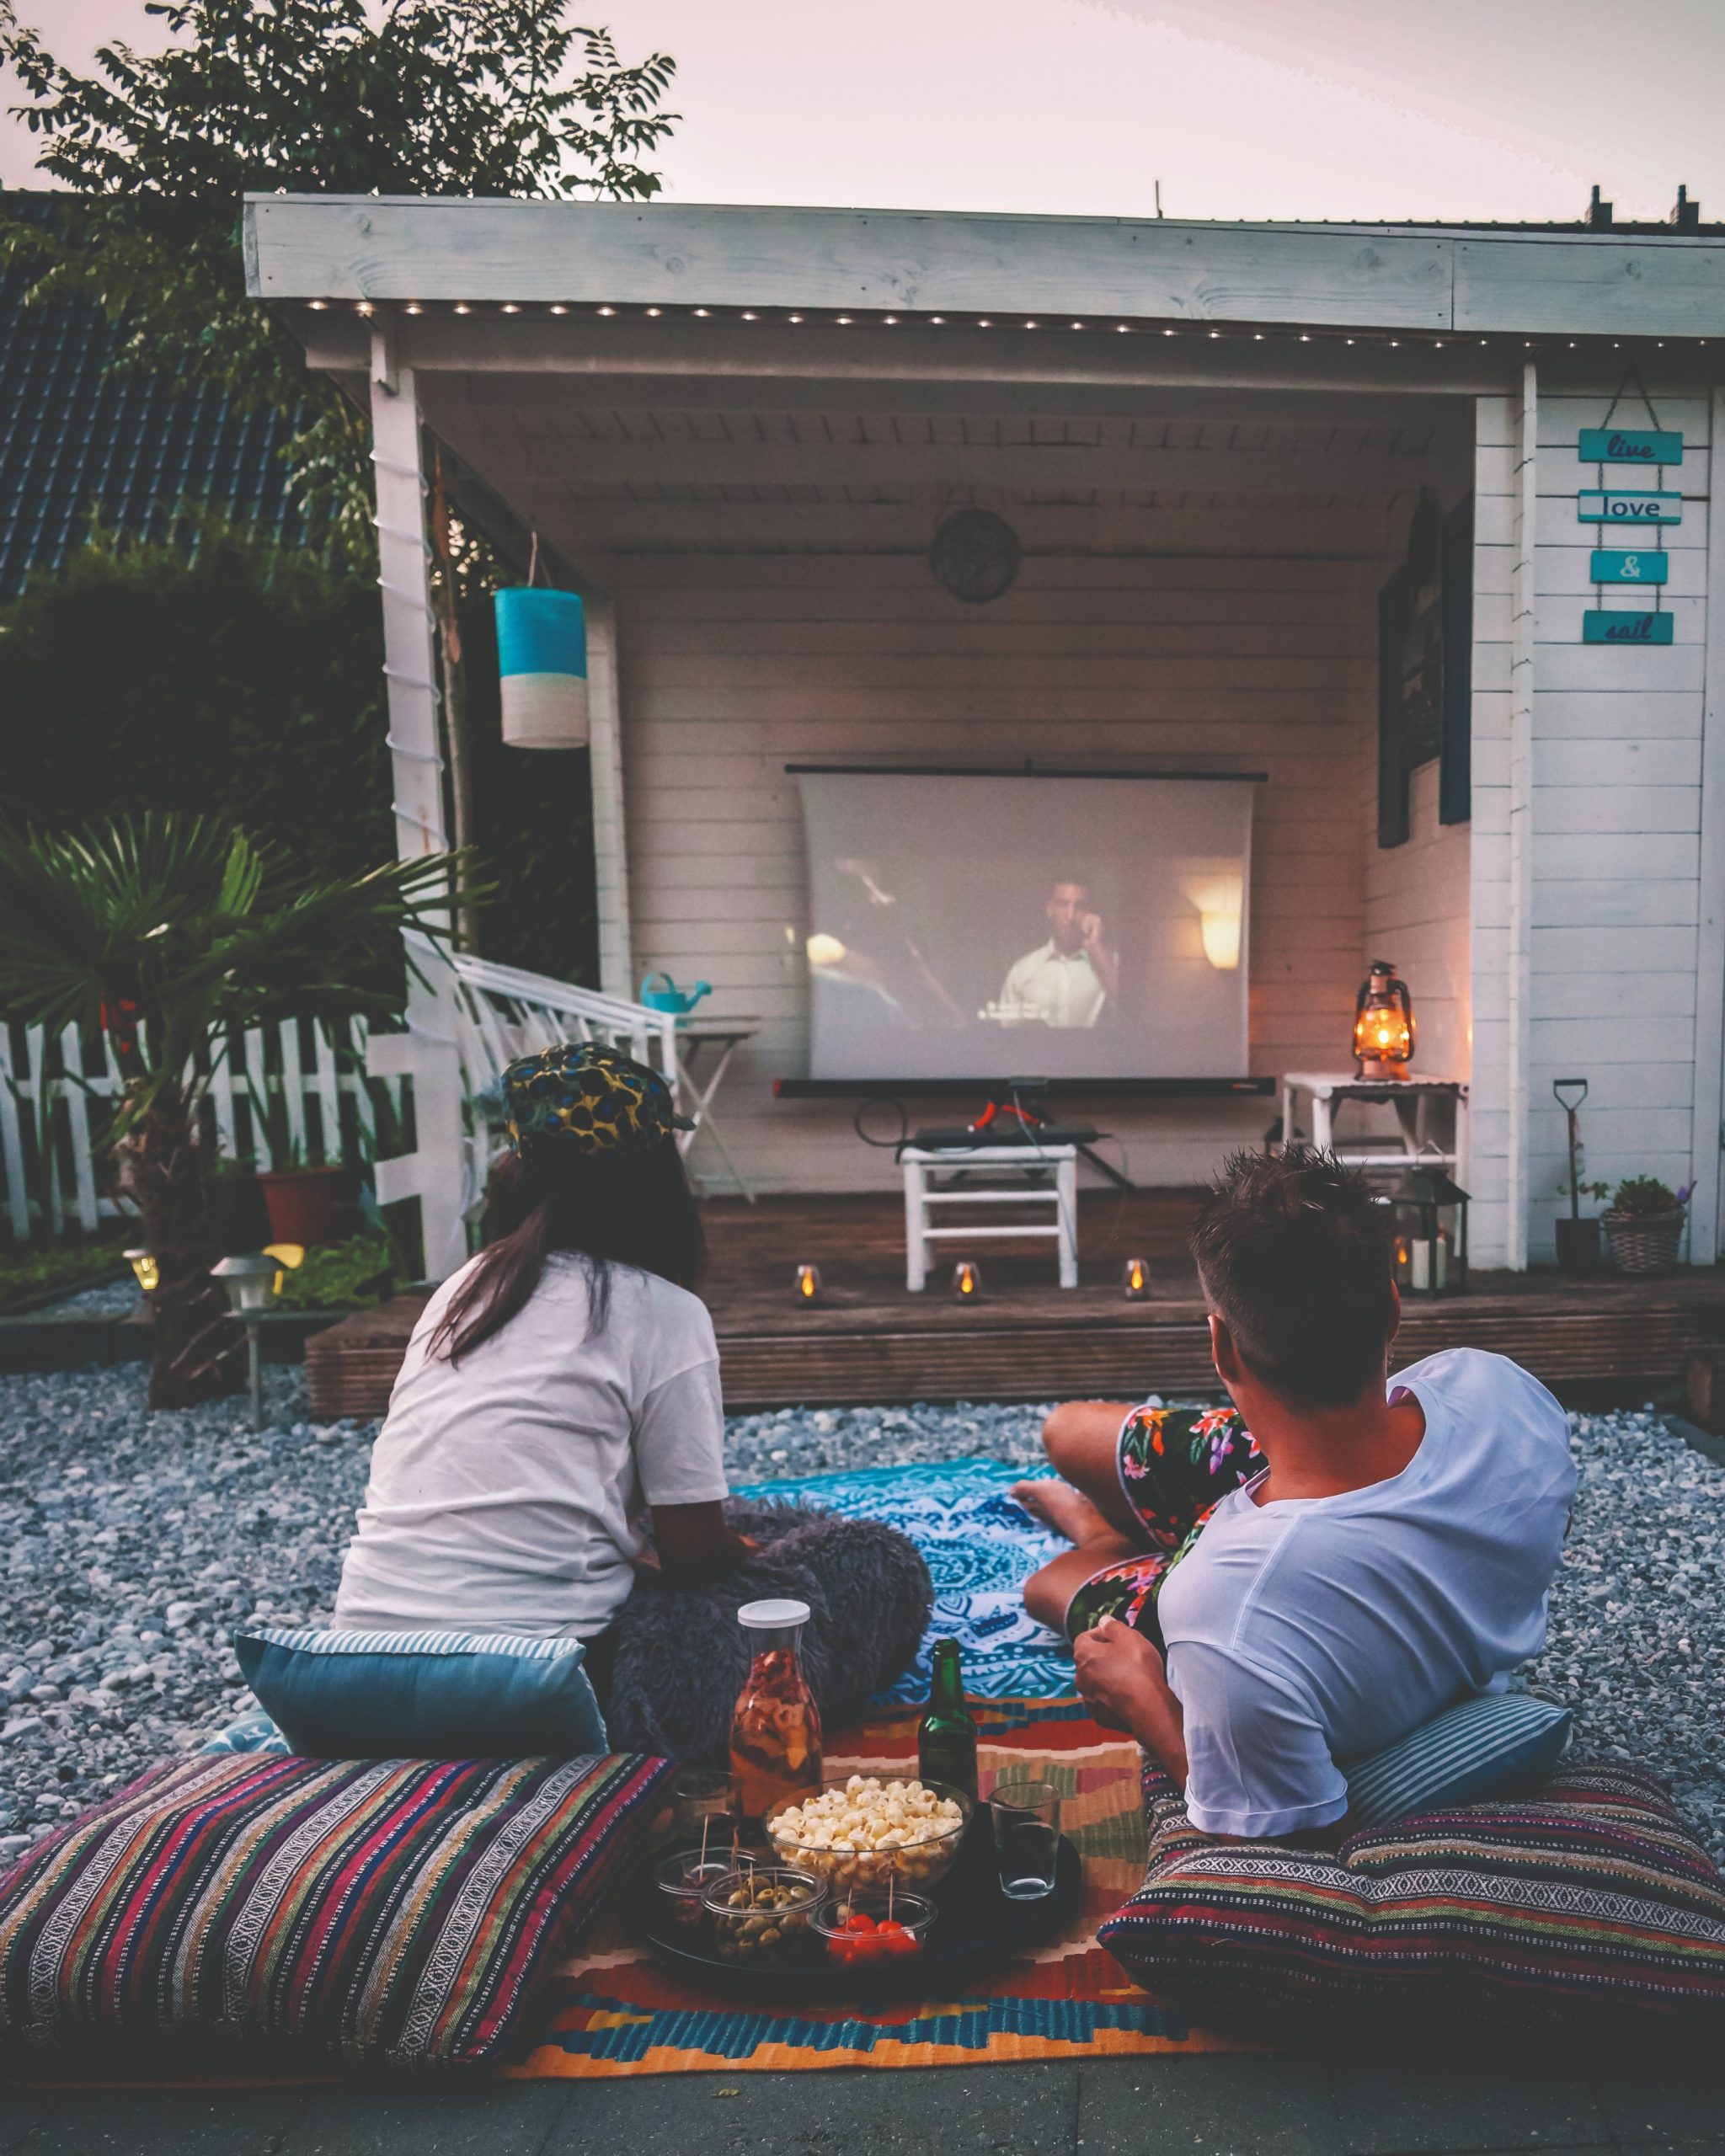 A man and a woman watch a movie on a projector from their driveway.